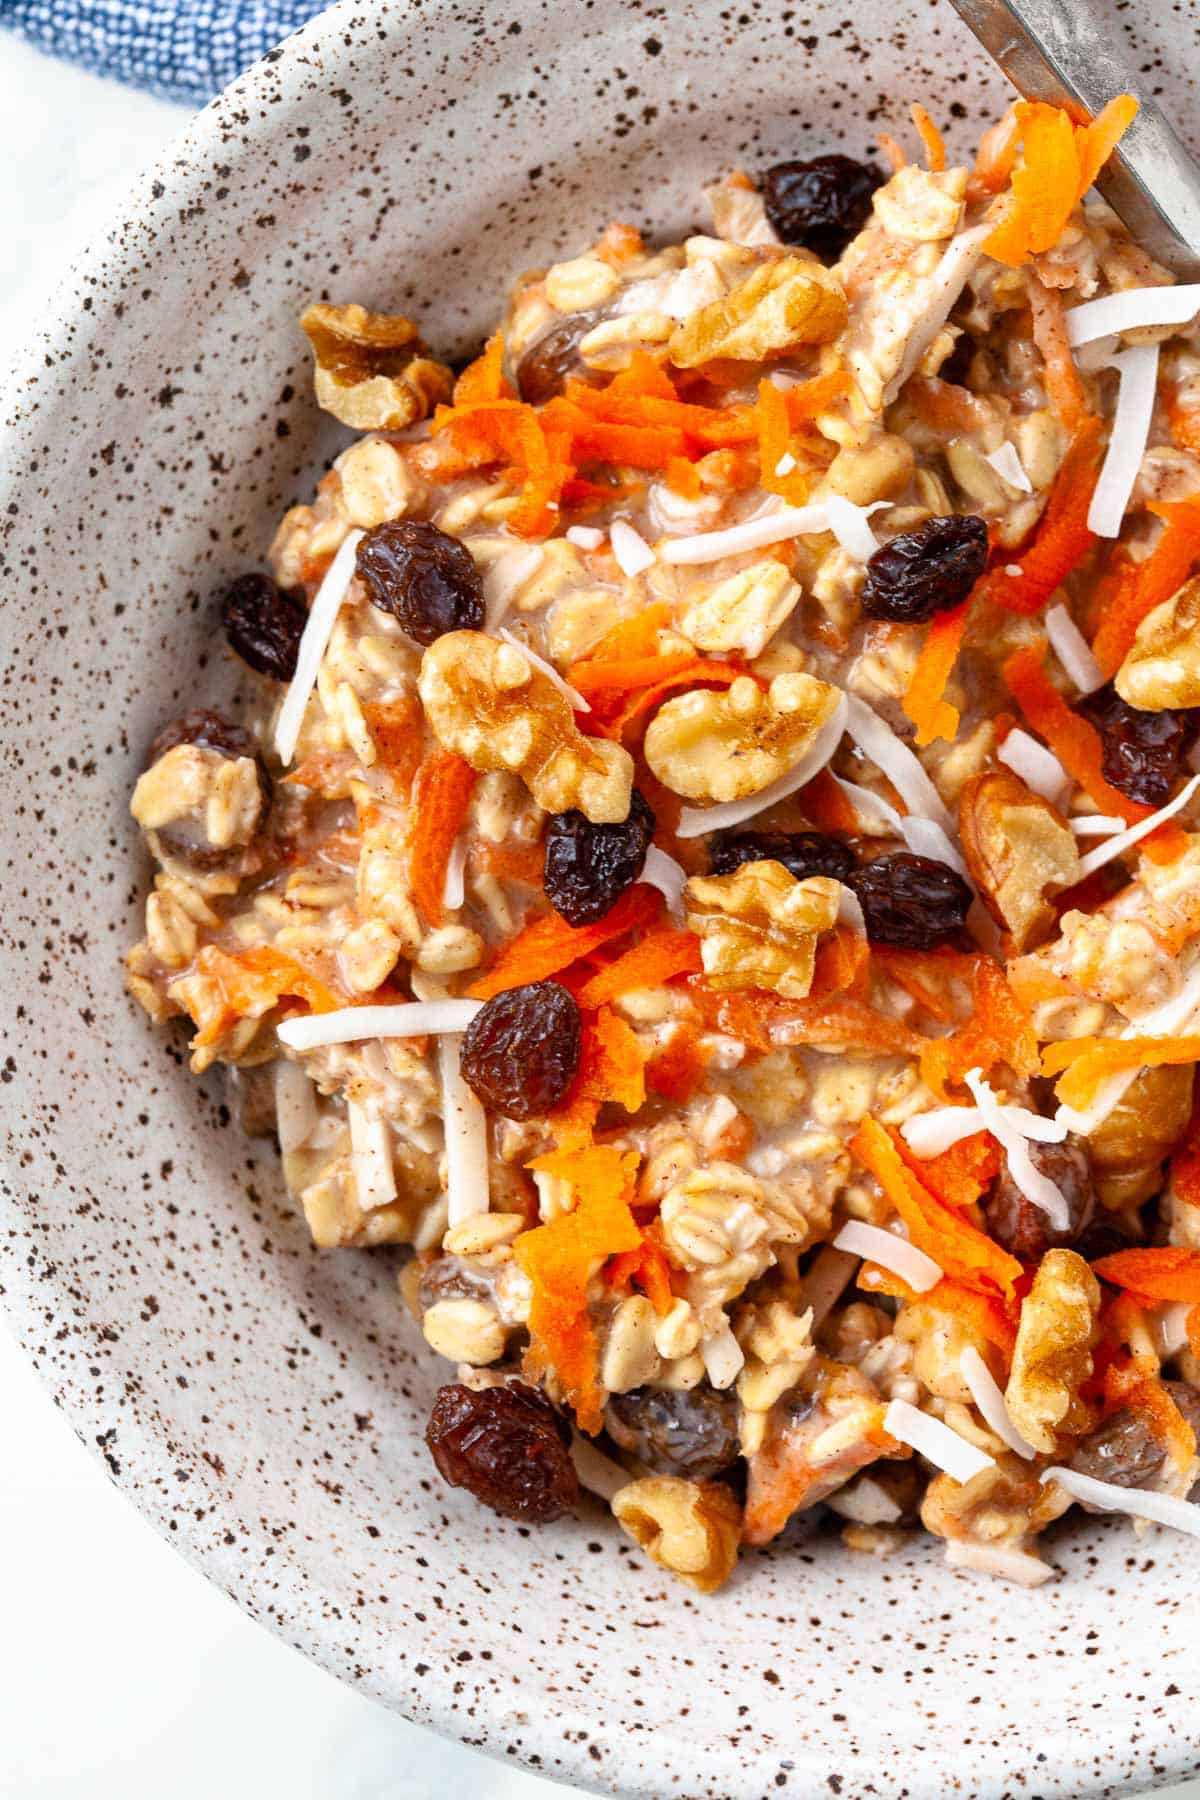 oatmeal close up, speckled bowl, raisins, coconut, and carrots on top